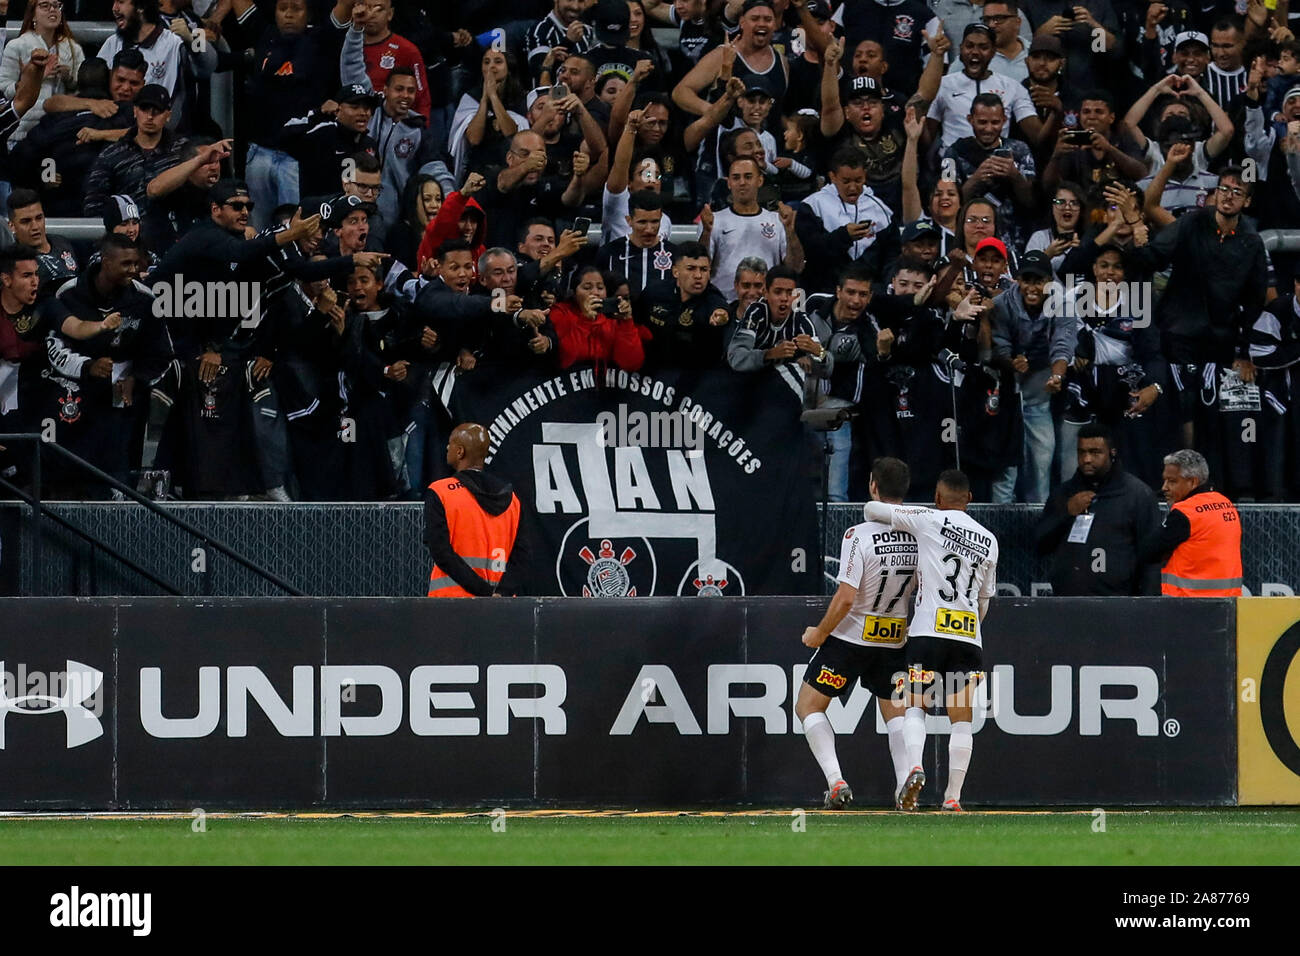 Boselli celebrate your goal, the third goal of Corinthians during the game between Corinthians and Fortaleza for the 31th round of the Brazilian league, known locally as Campeonato Brasiliero. The game took place at the Arena Corinthians in Sao Paulo, Brazil. Stock Photo